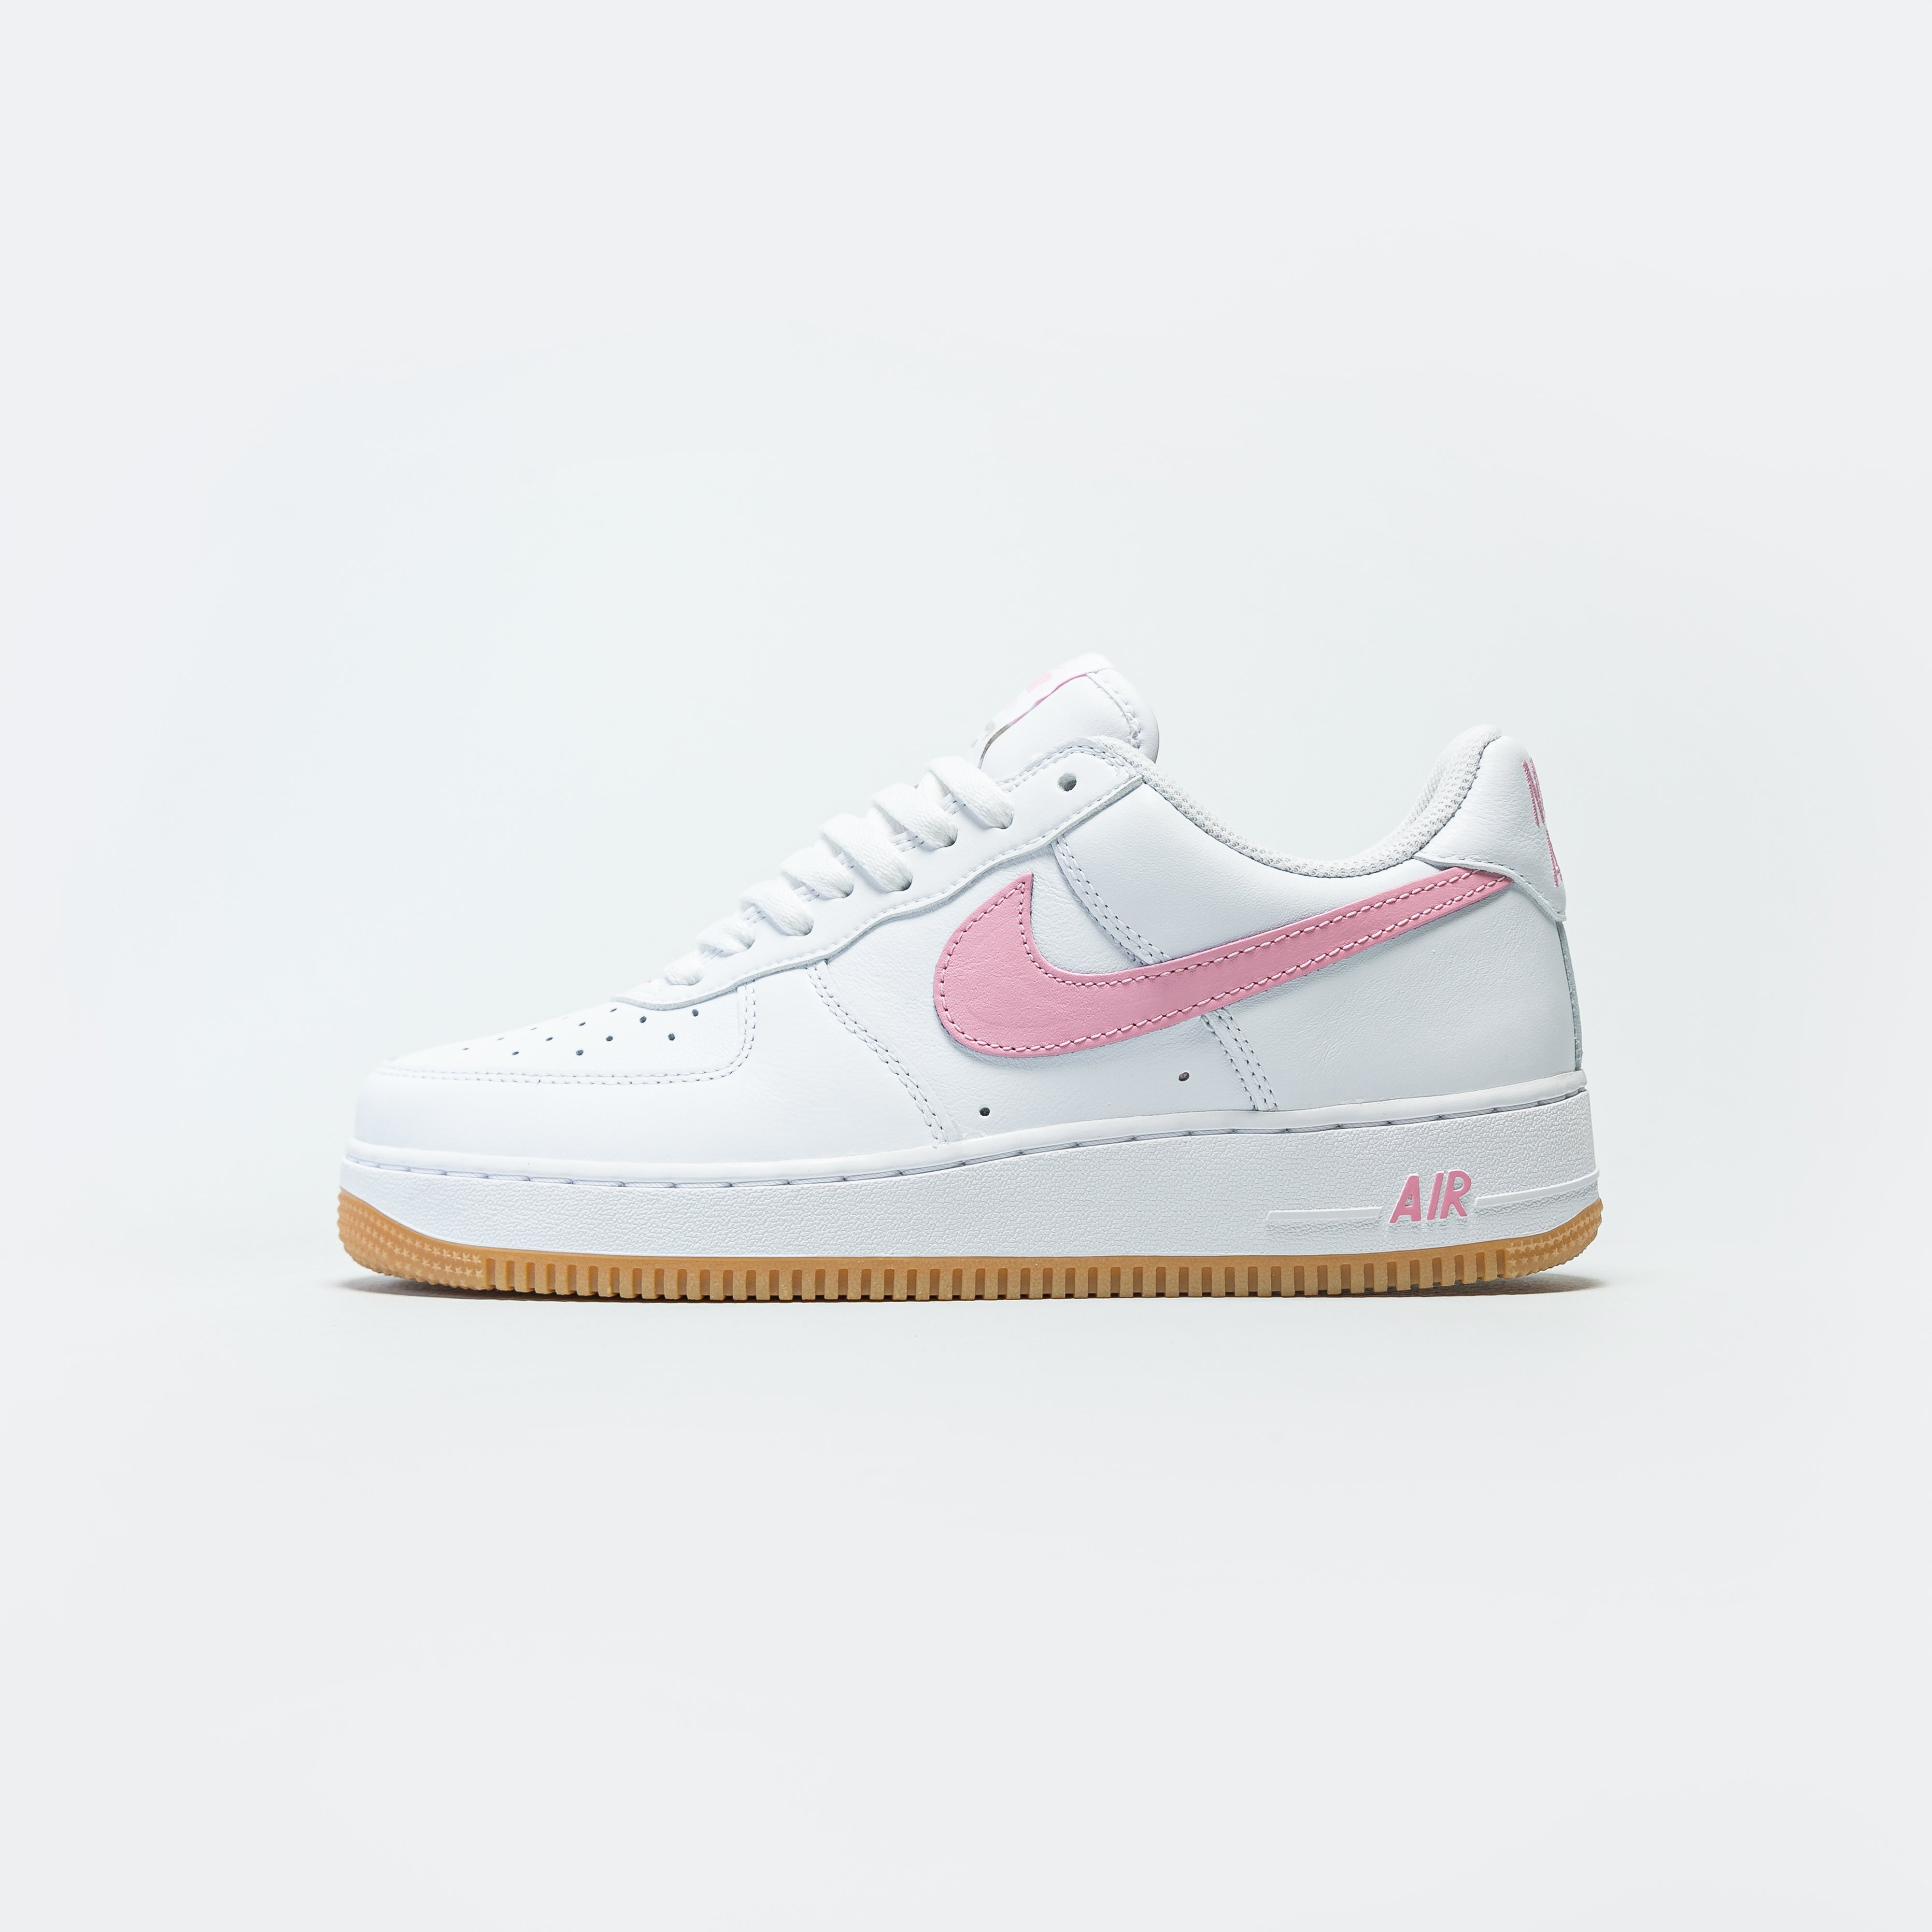 white airforces with pink